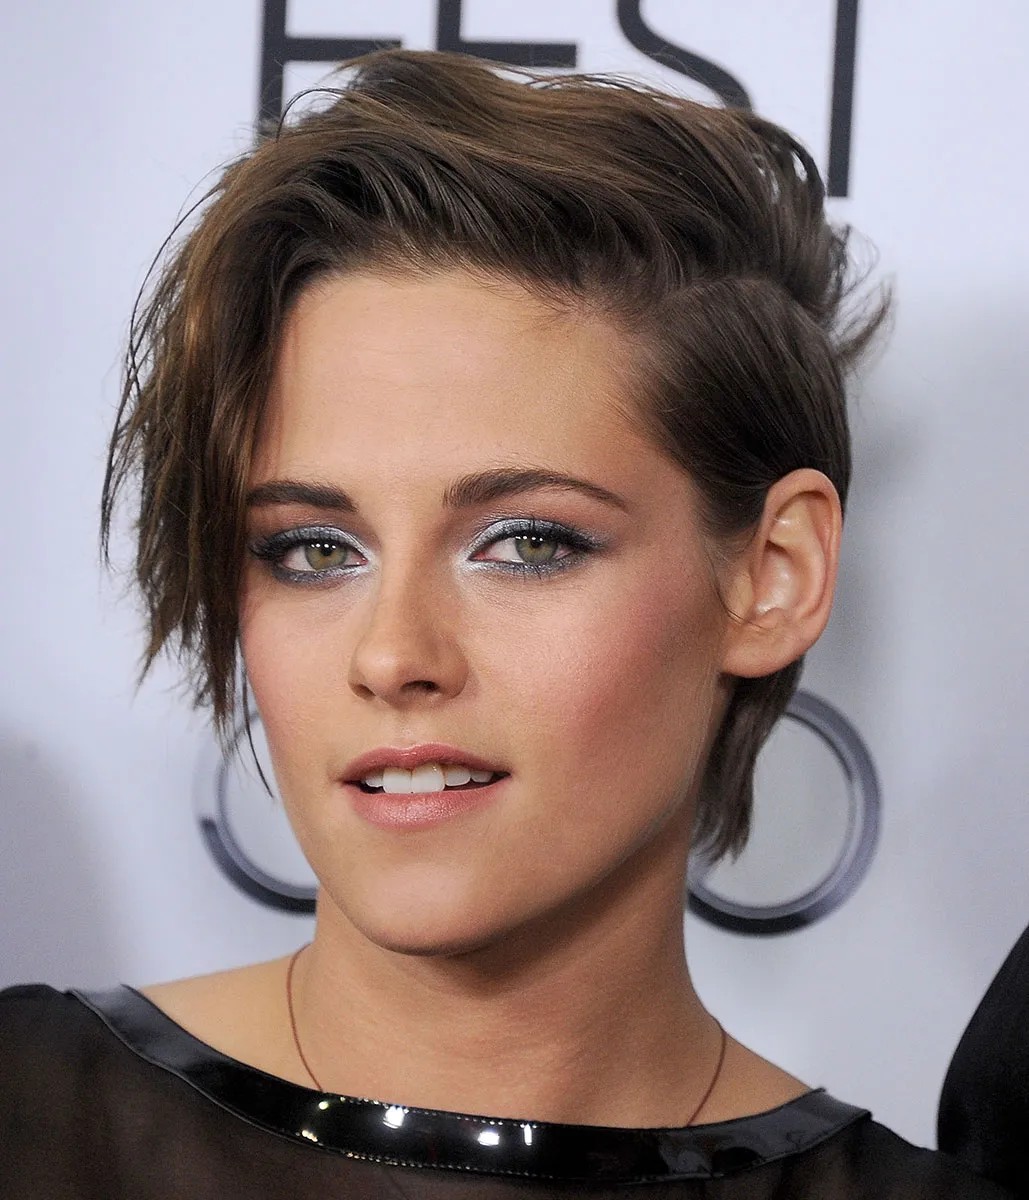 For Amazing Short-Stunning Hairstyles Take Cues From Kristen Stewart |  IWMBuzz